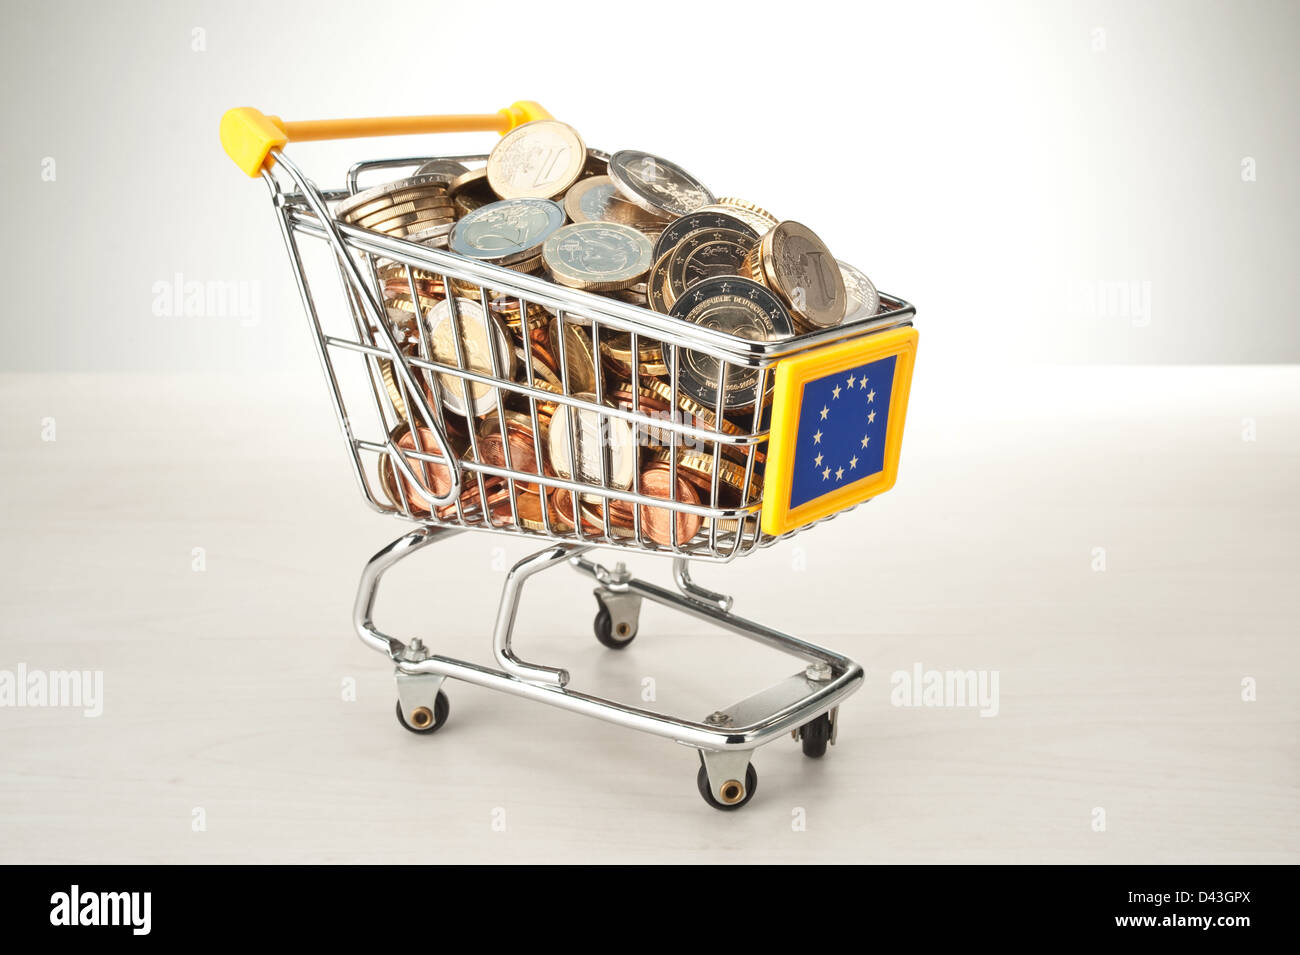 Hamburg, Germany, Euromuenzen in a cart with European characters Stock Photo